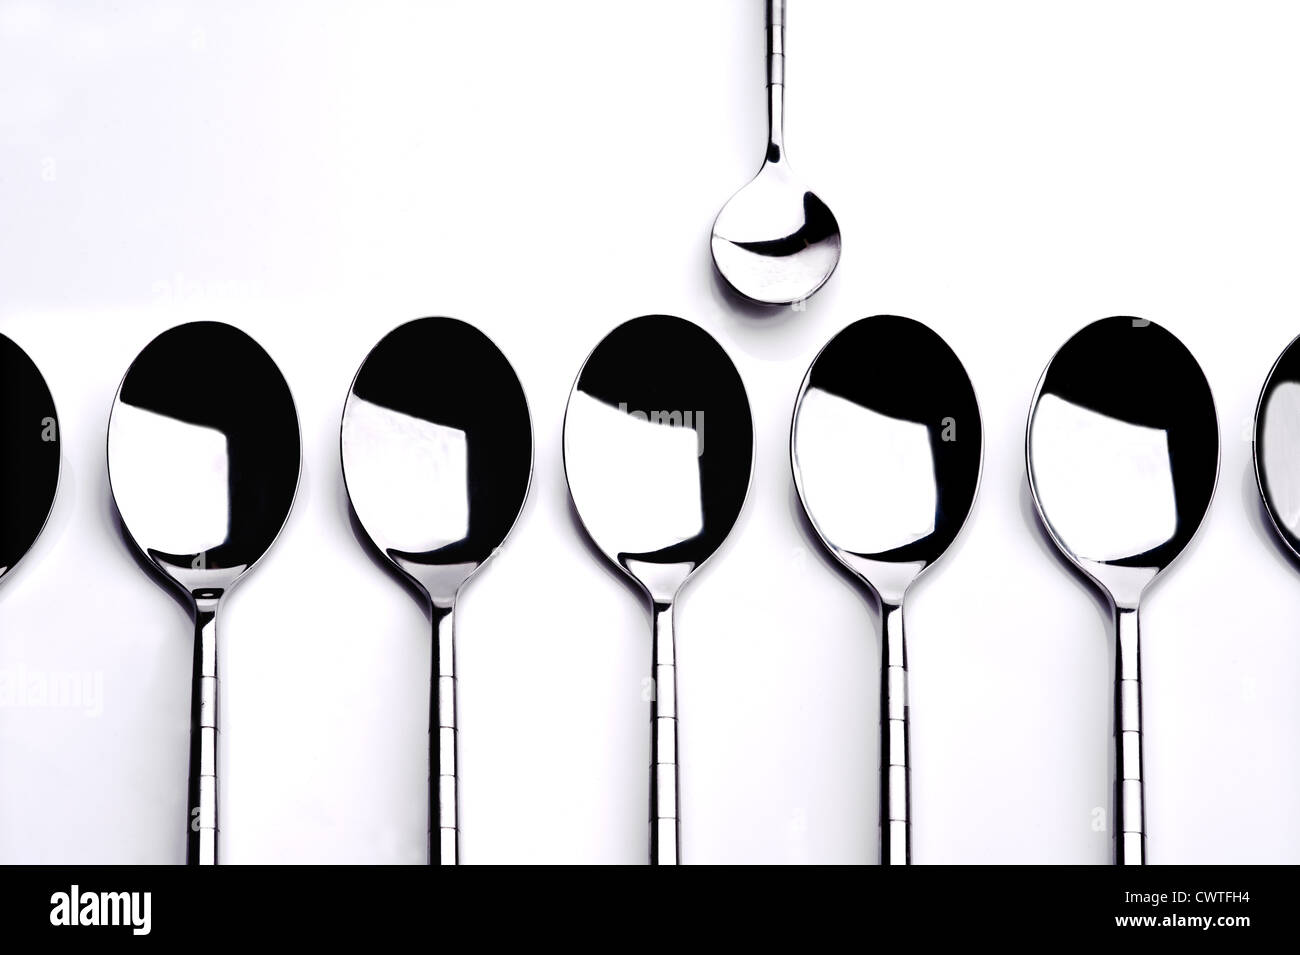 Group of dessert spoons with one teaspoon standing alone. Stock Photo